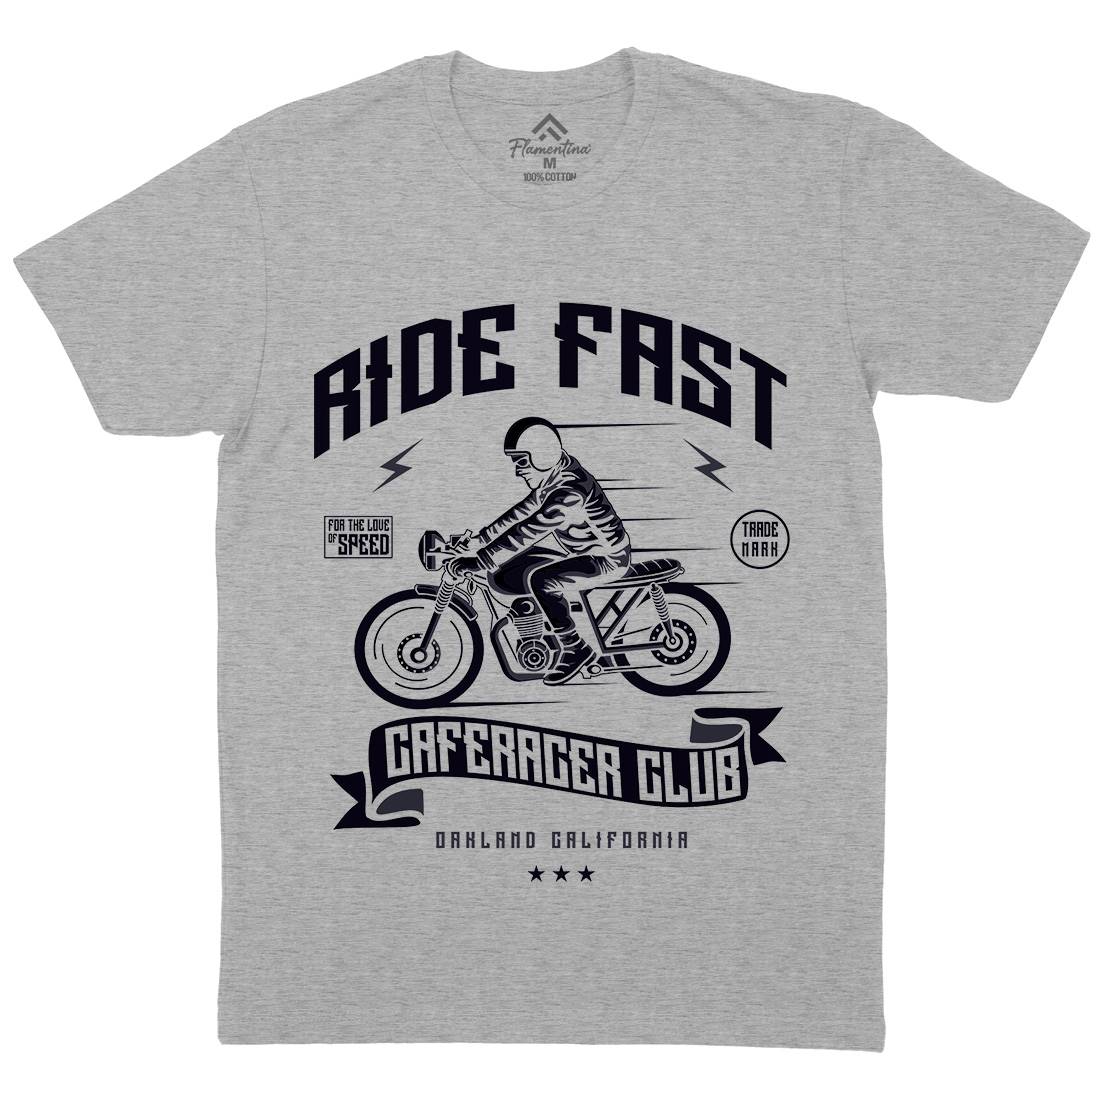 Ride Fast Mens Organic Crew Neck T-Shirt Motorcycles A117